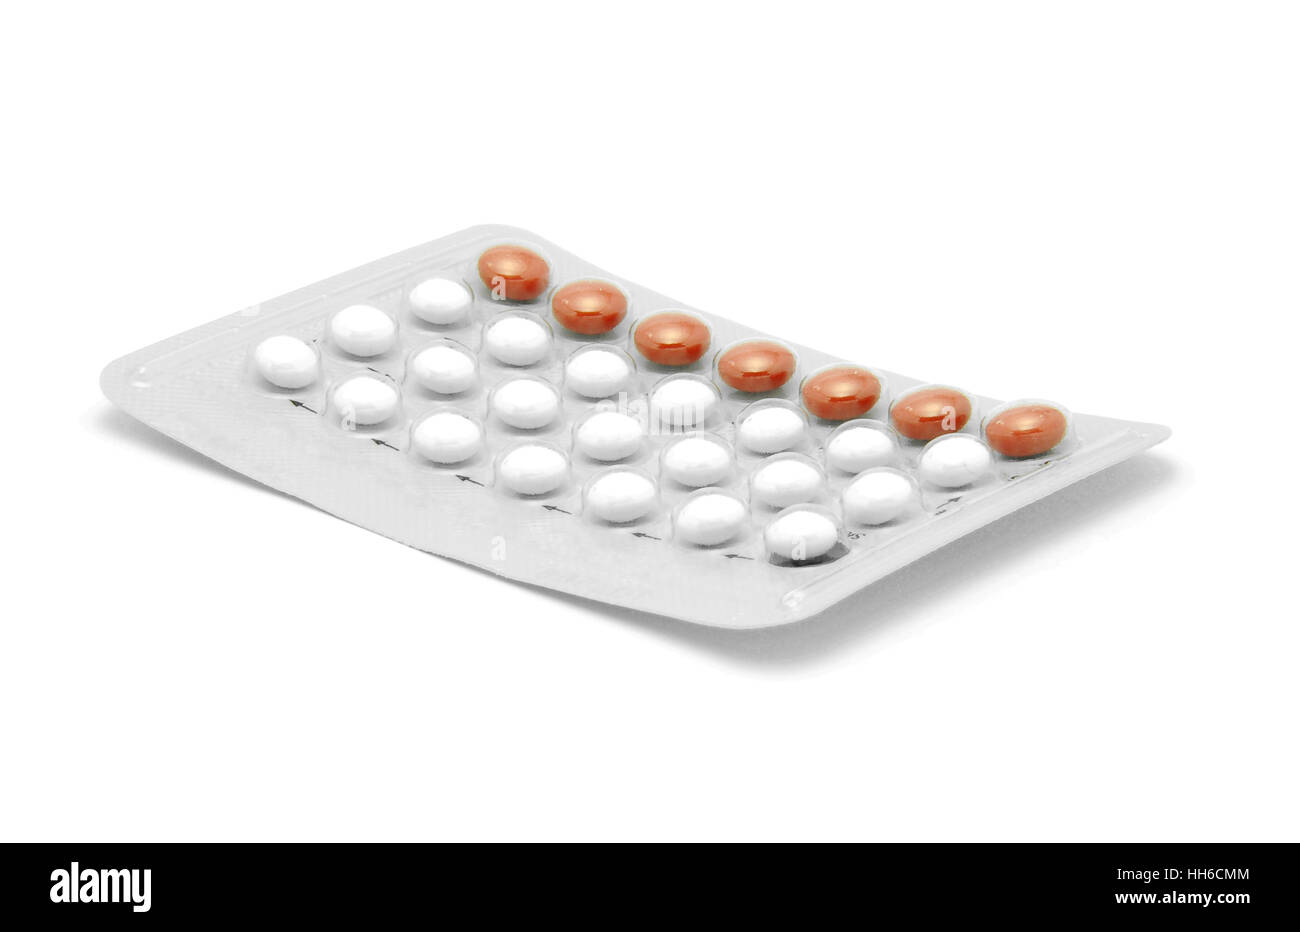 contraceptive pills isolated Stock Photo